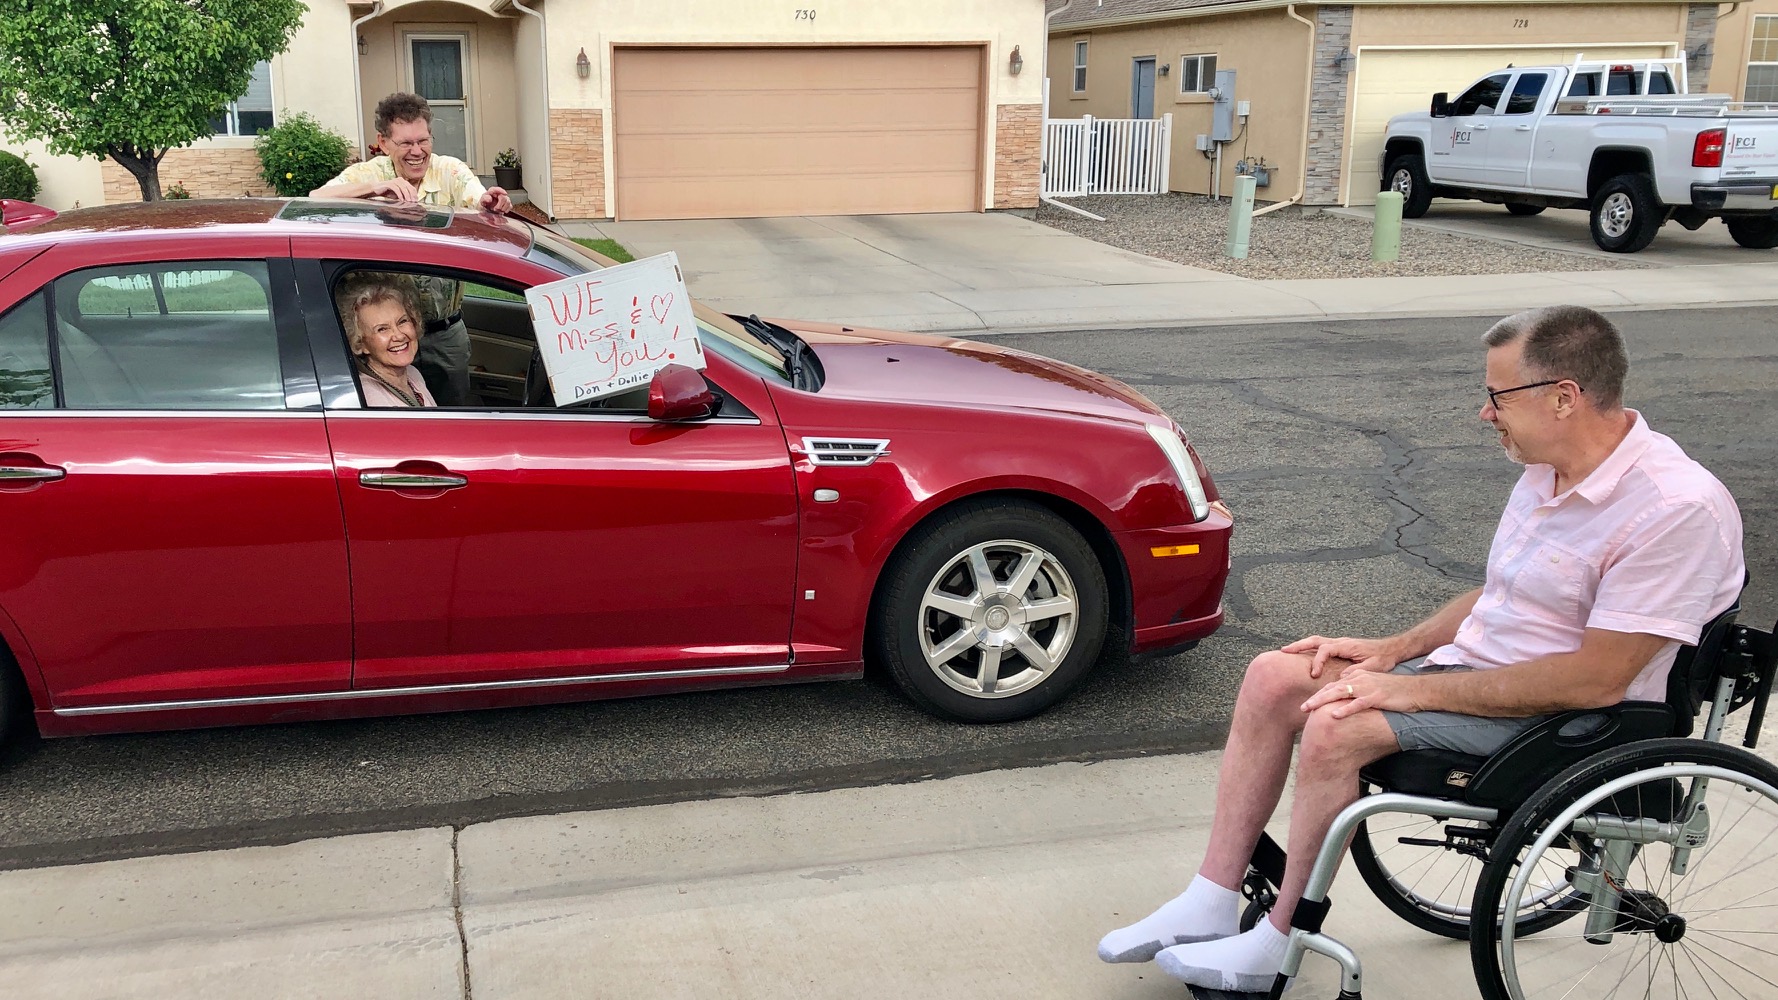 A GRAND JUNCTION COUPLE INITIATES CURB-SIDE VISITS TO ALL FELLOW CHURCH MEMBERS